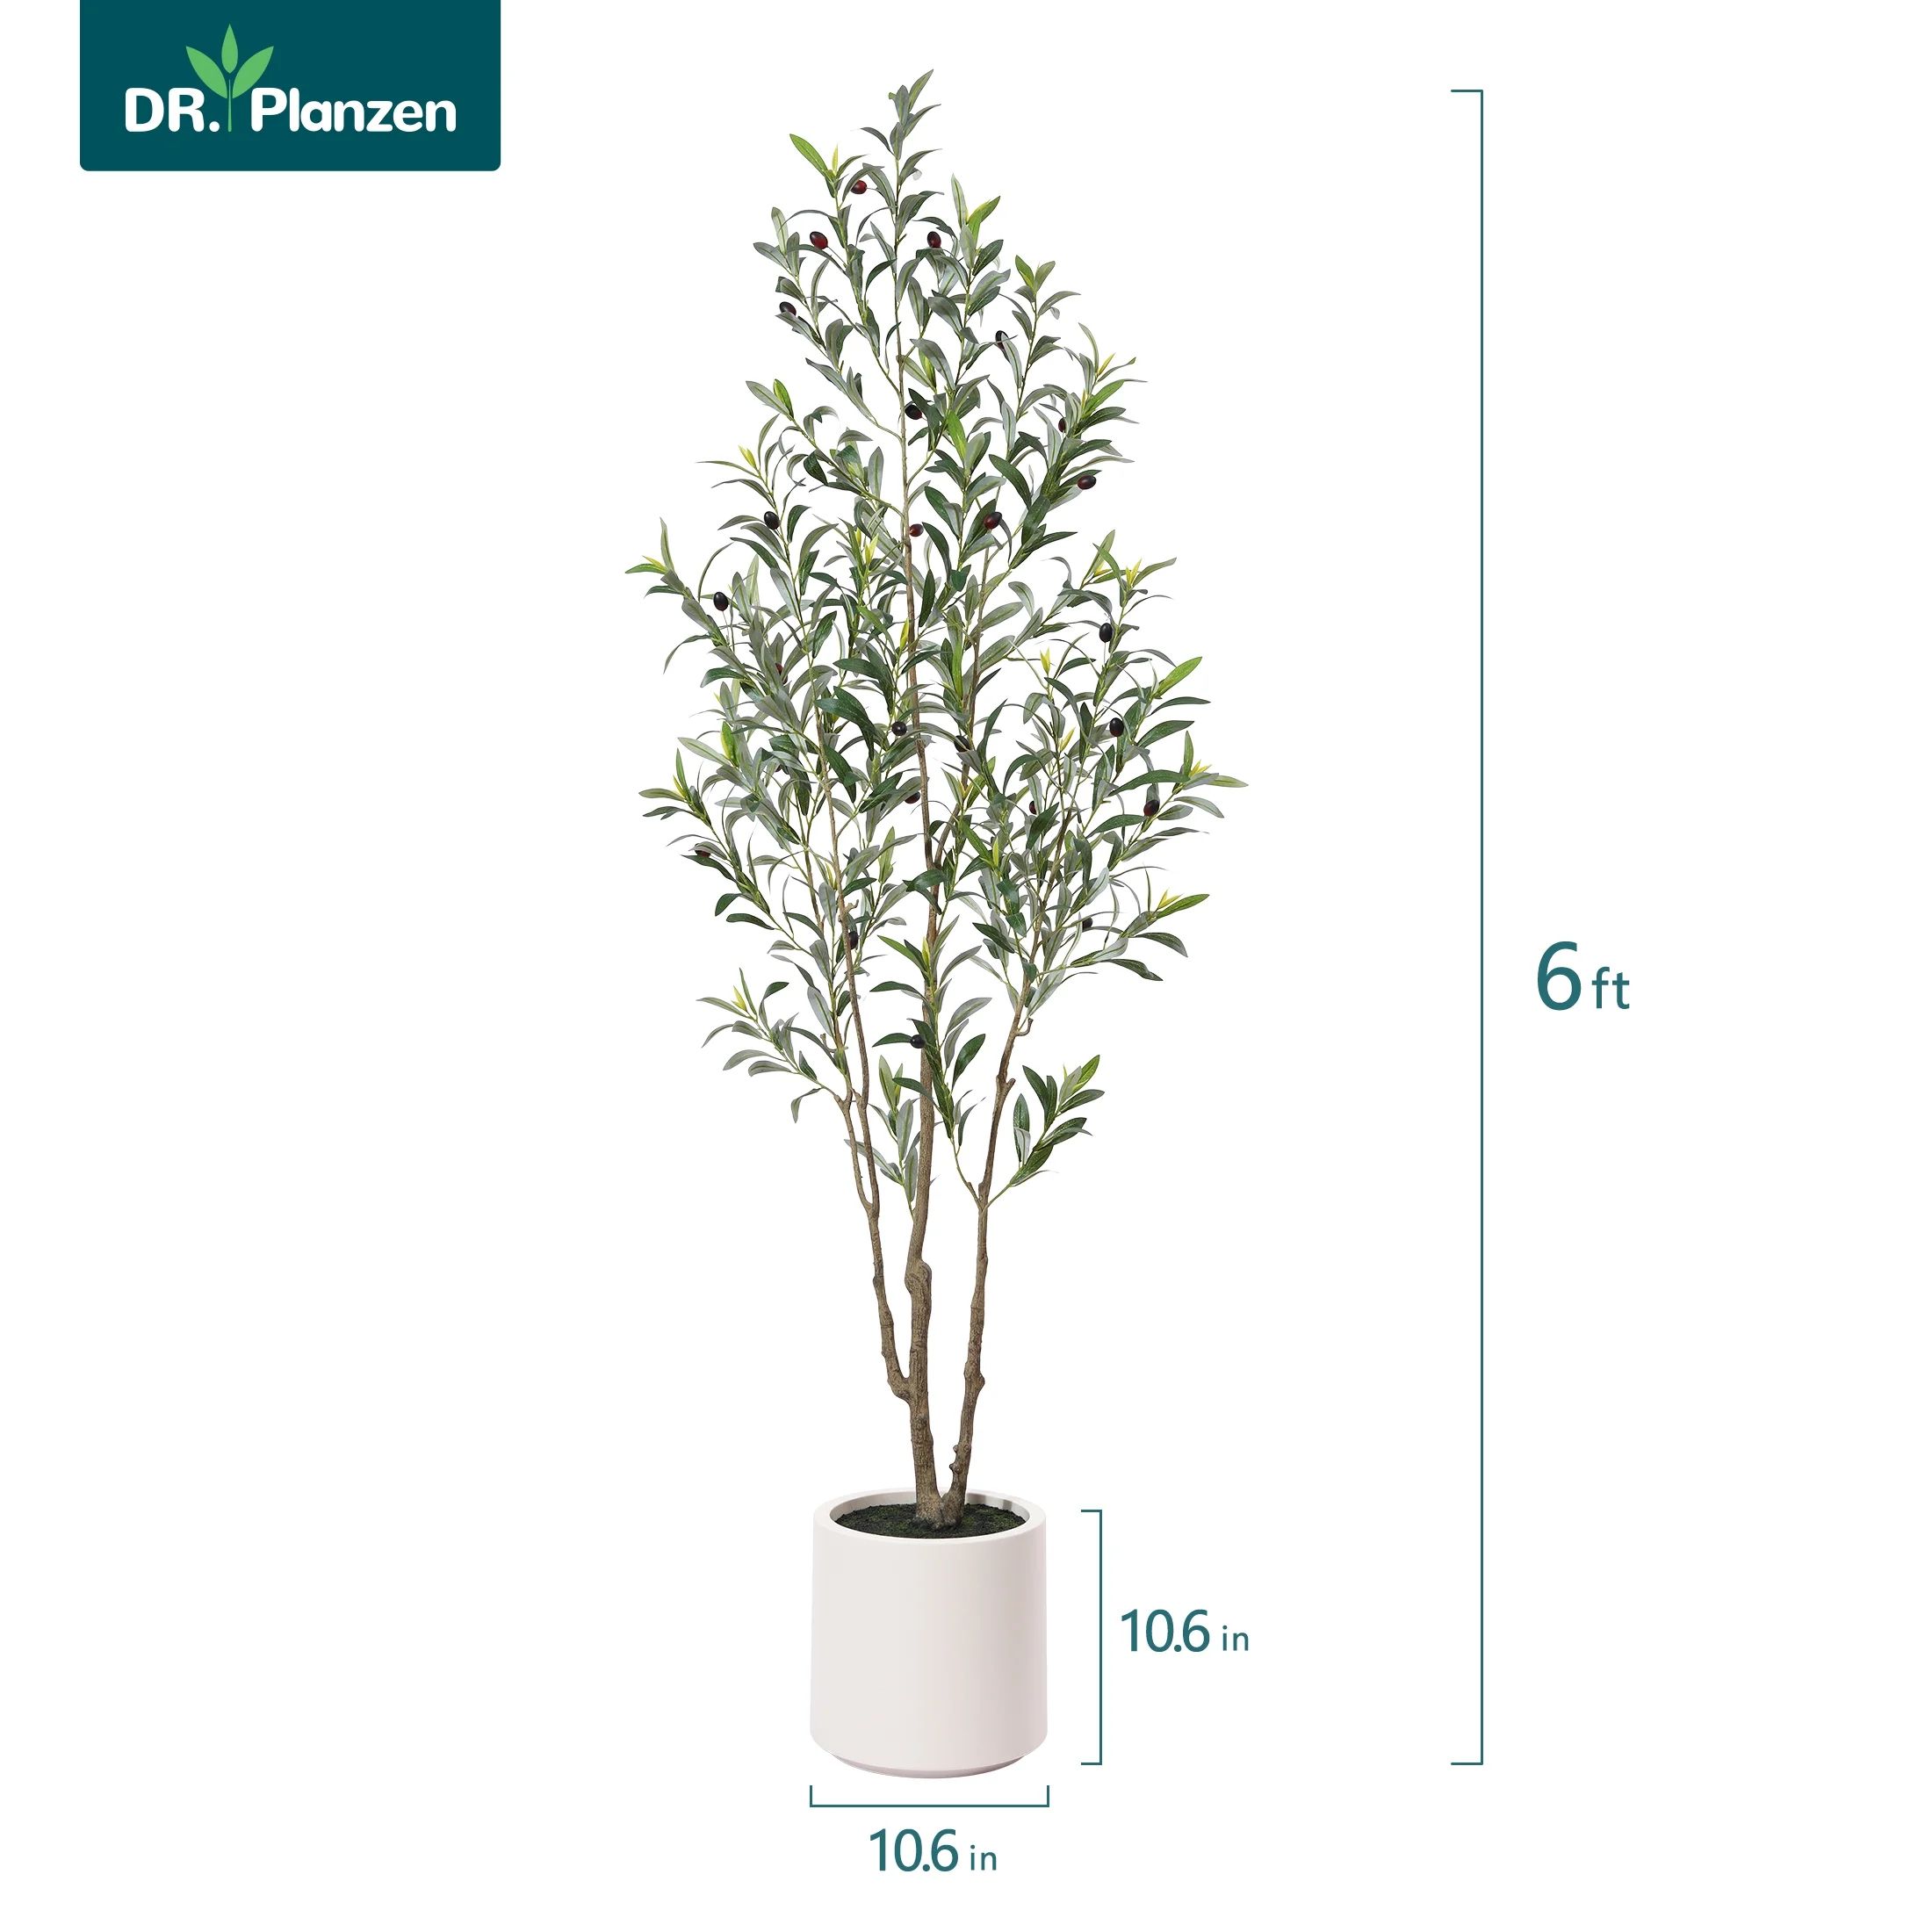 Muti-Trunk Olive Tree 6FT Artificial Plants with 10.6 inches Large White Planter. 10 lb. DR.Planzen | Walmart (US)